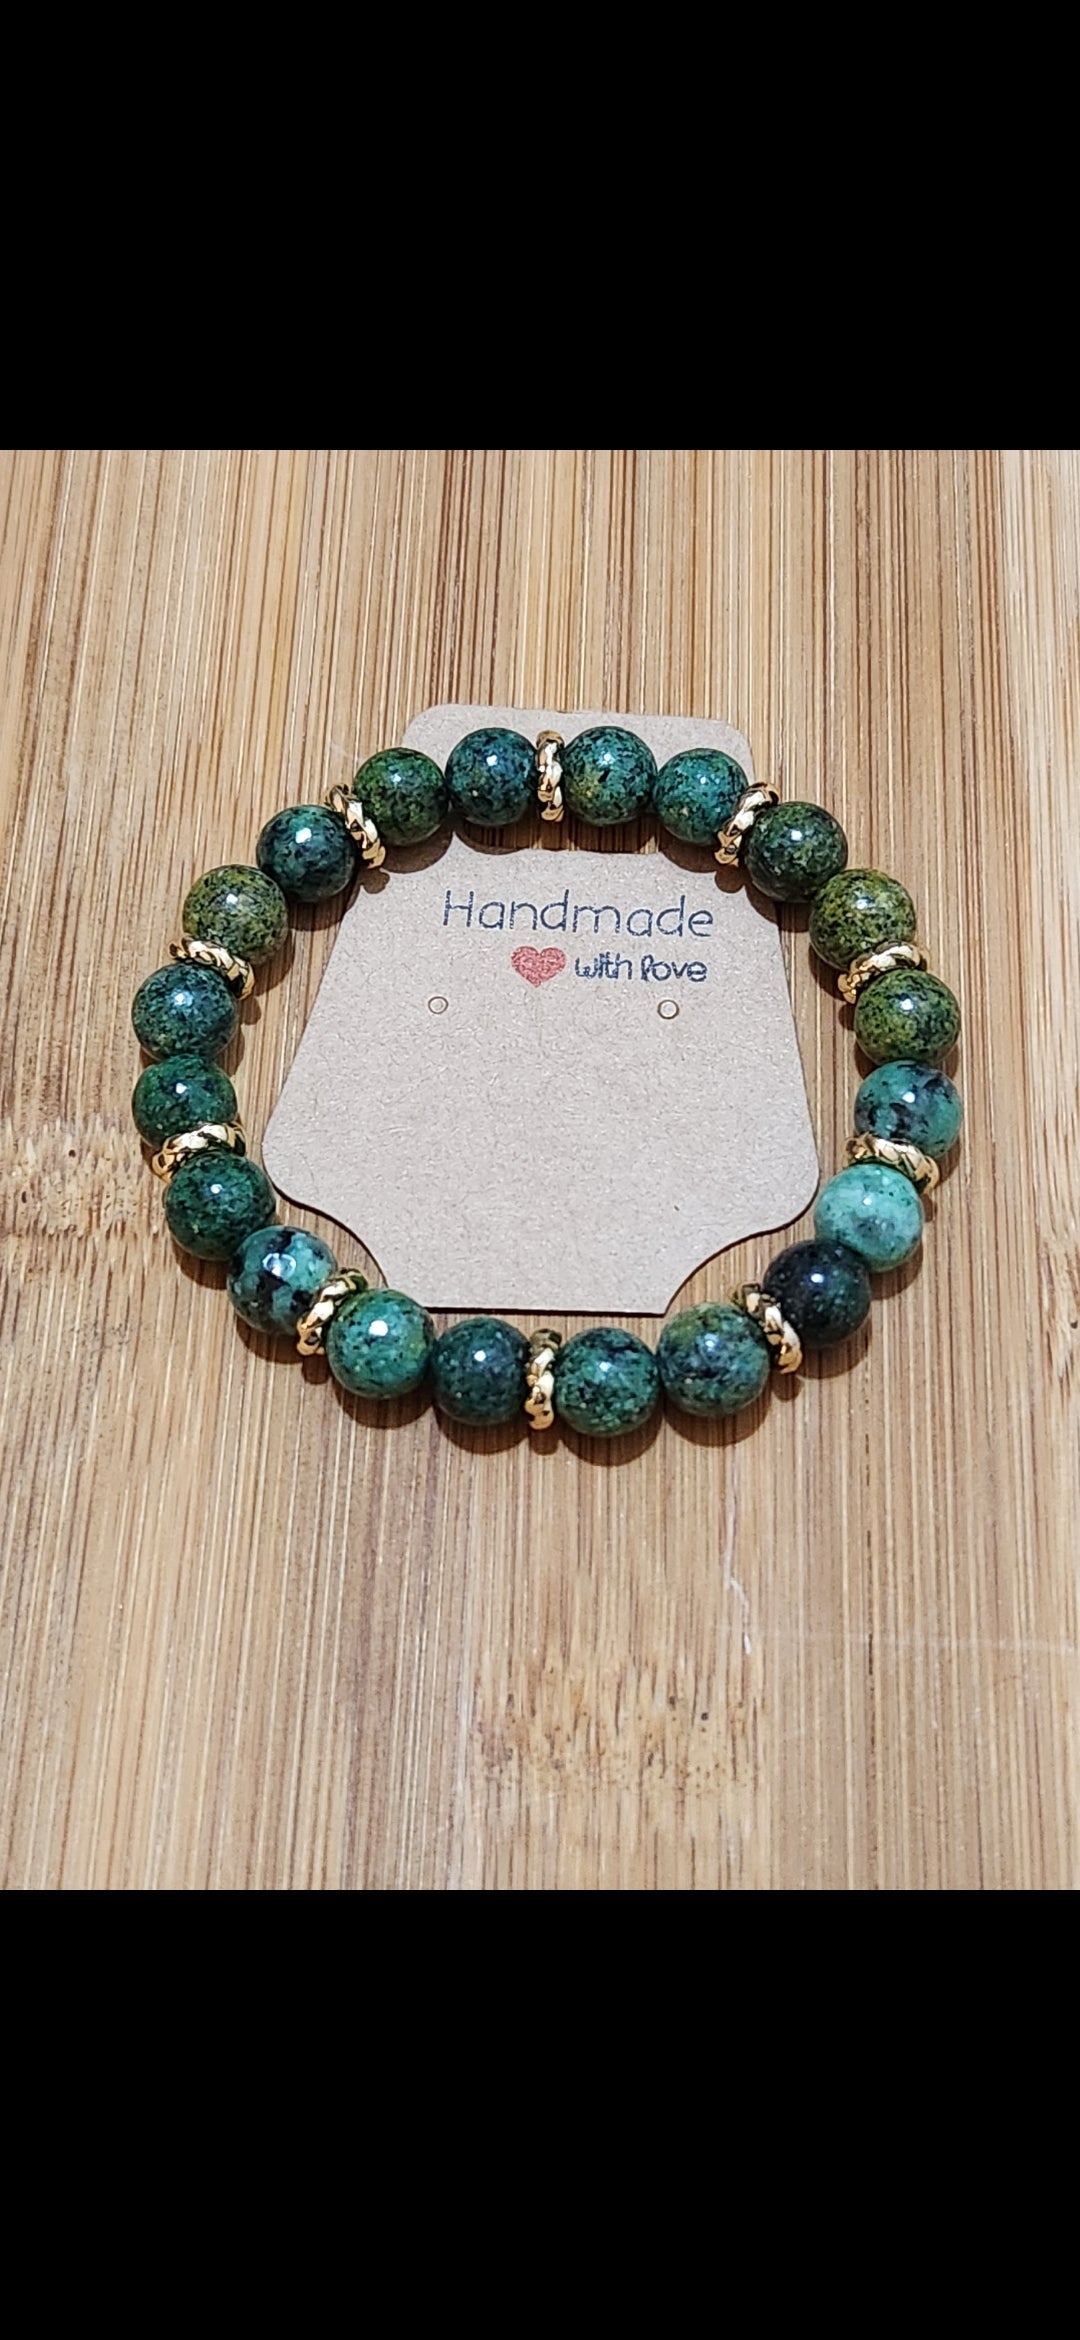 Green African Turquoise Stone beaded bracelet with accents - wisdom - good fortune - renewal